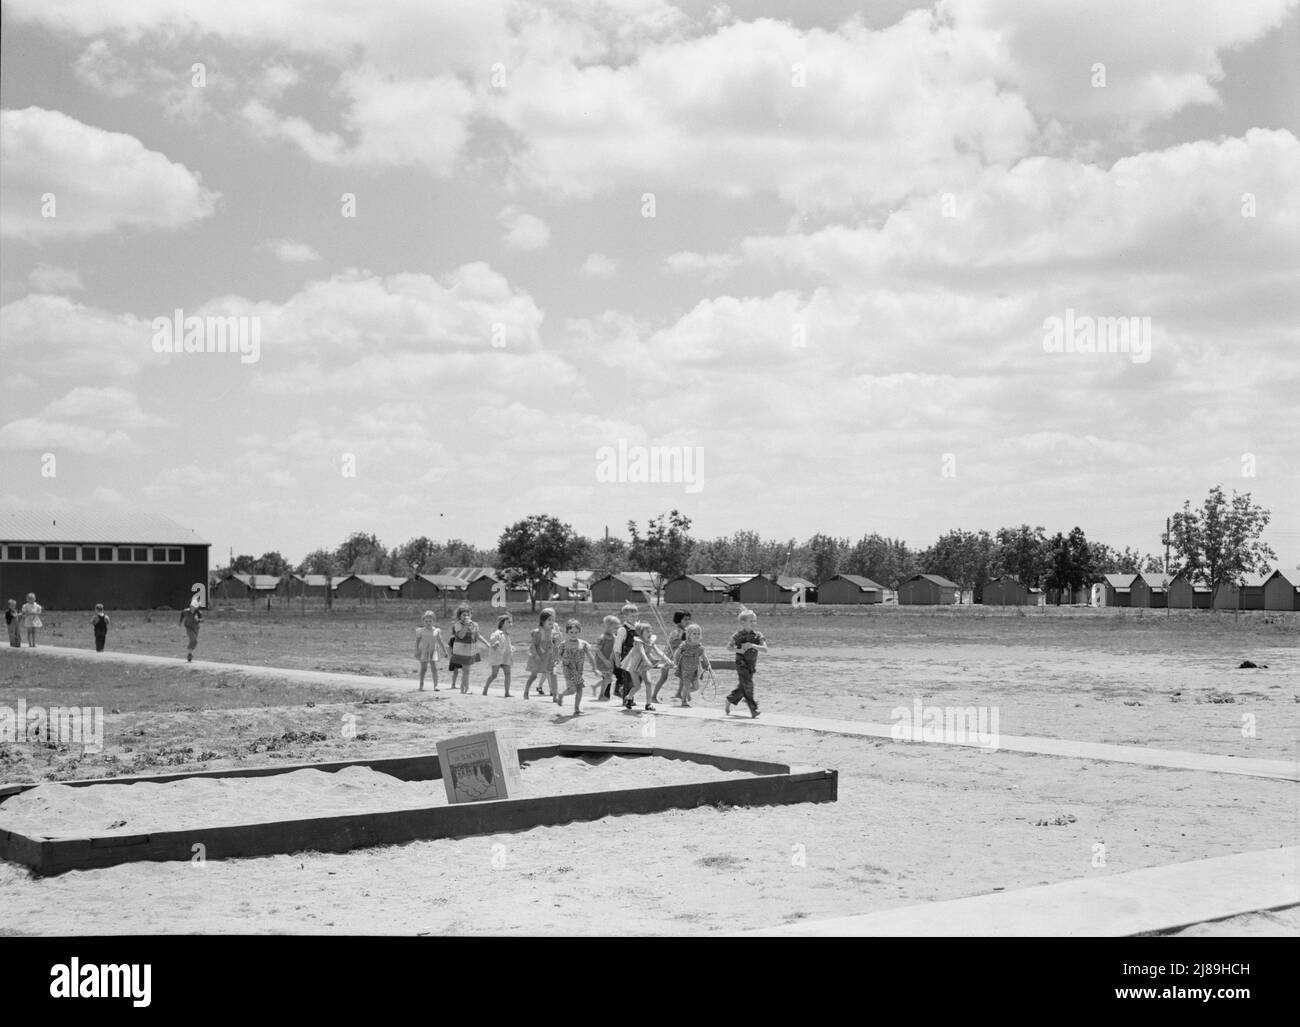 Tulare County, California. Farm Security Administration (FSA) camp for migrant agricultural workers. Nursery school children. Row of prefabricated steel shelters in which their families live shown in background. Stock Photo